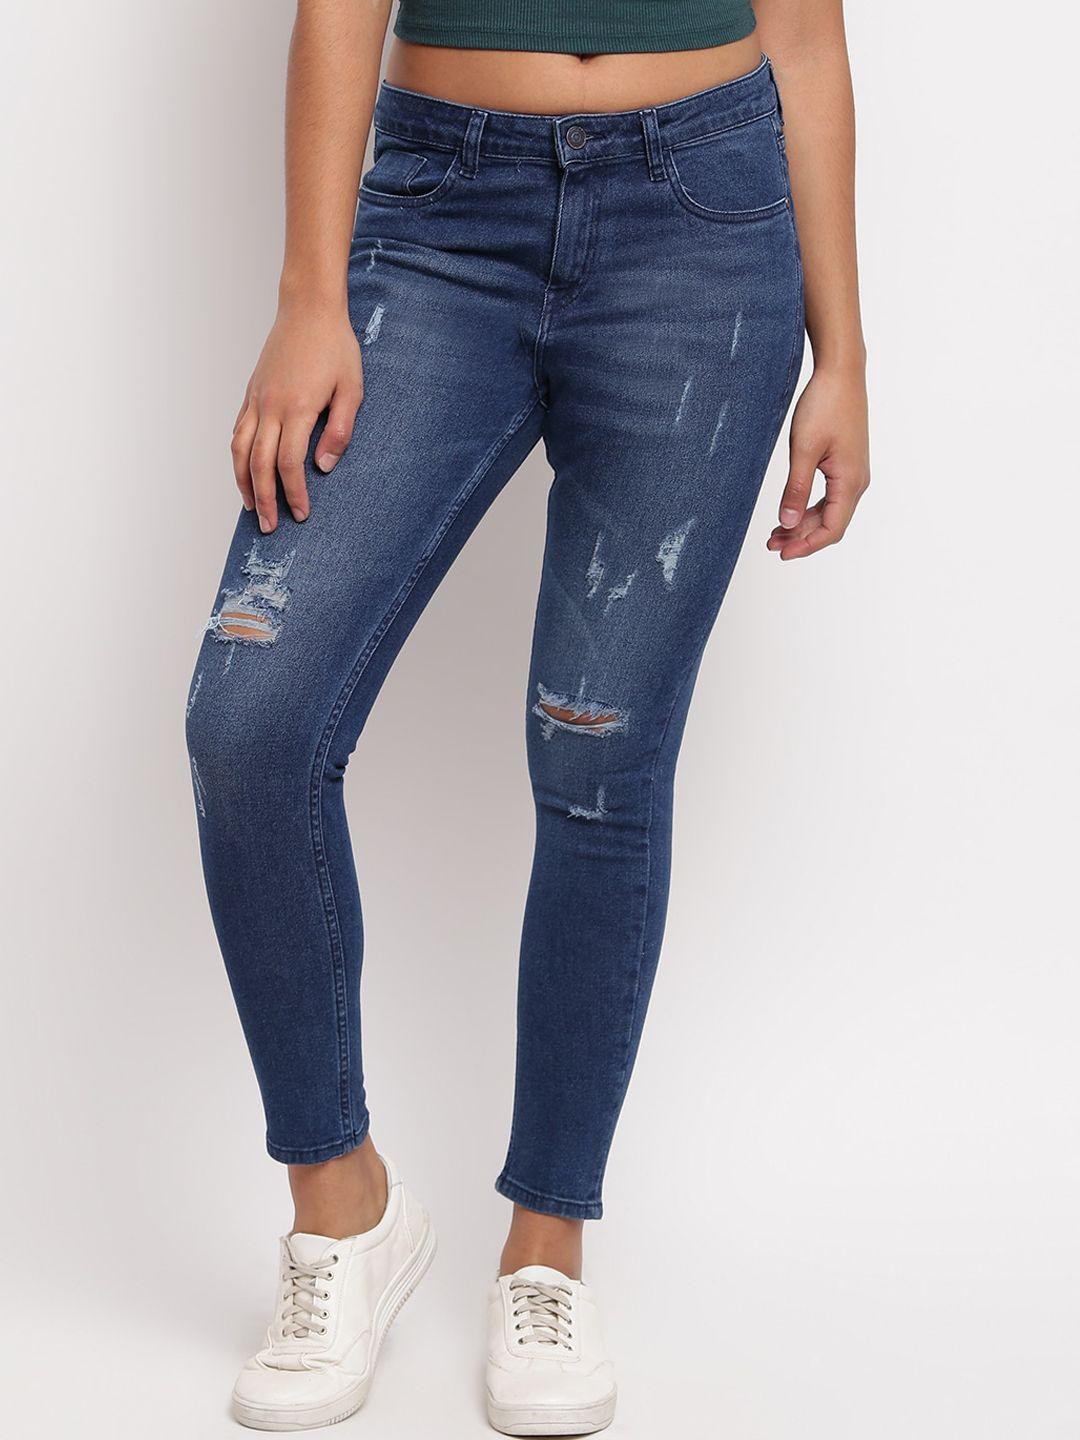 TALES & STORIES Women Blue Skinny Fit Highly Distressed Stretchable Jeans